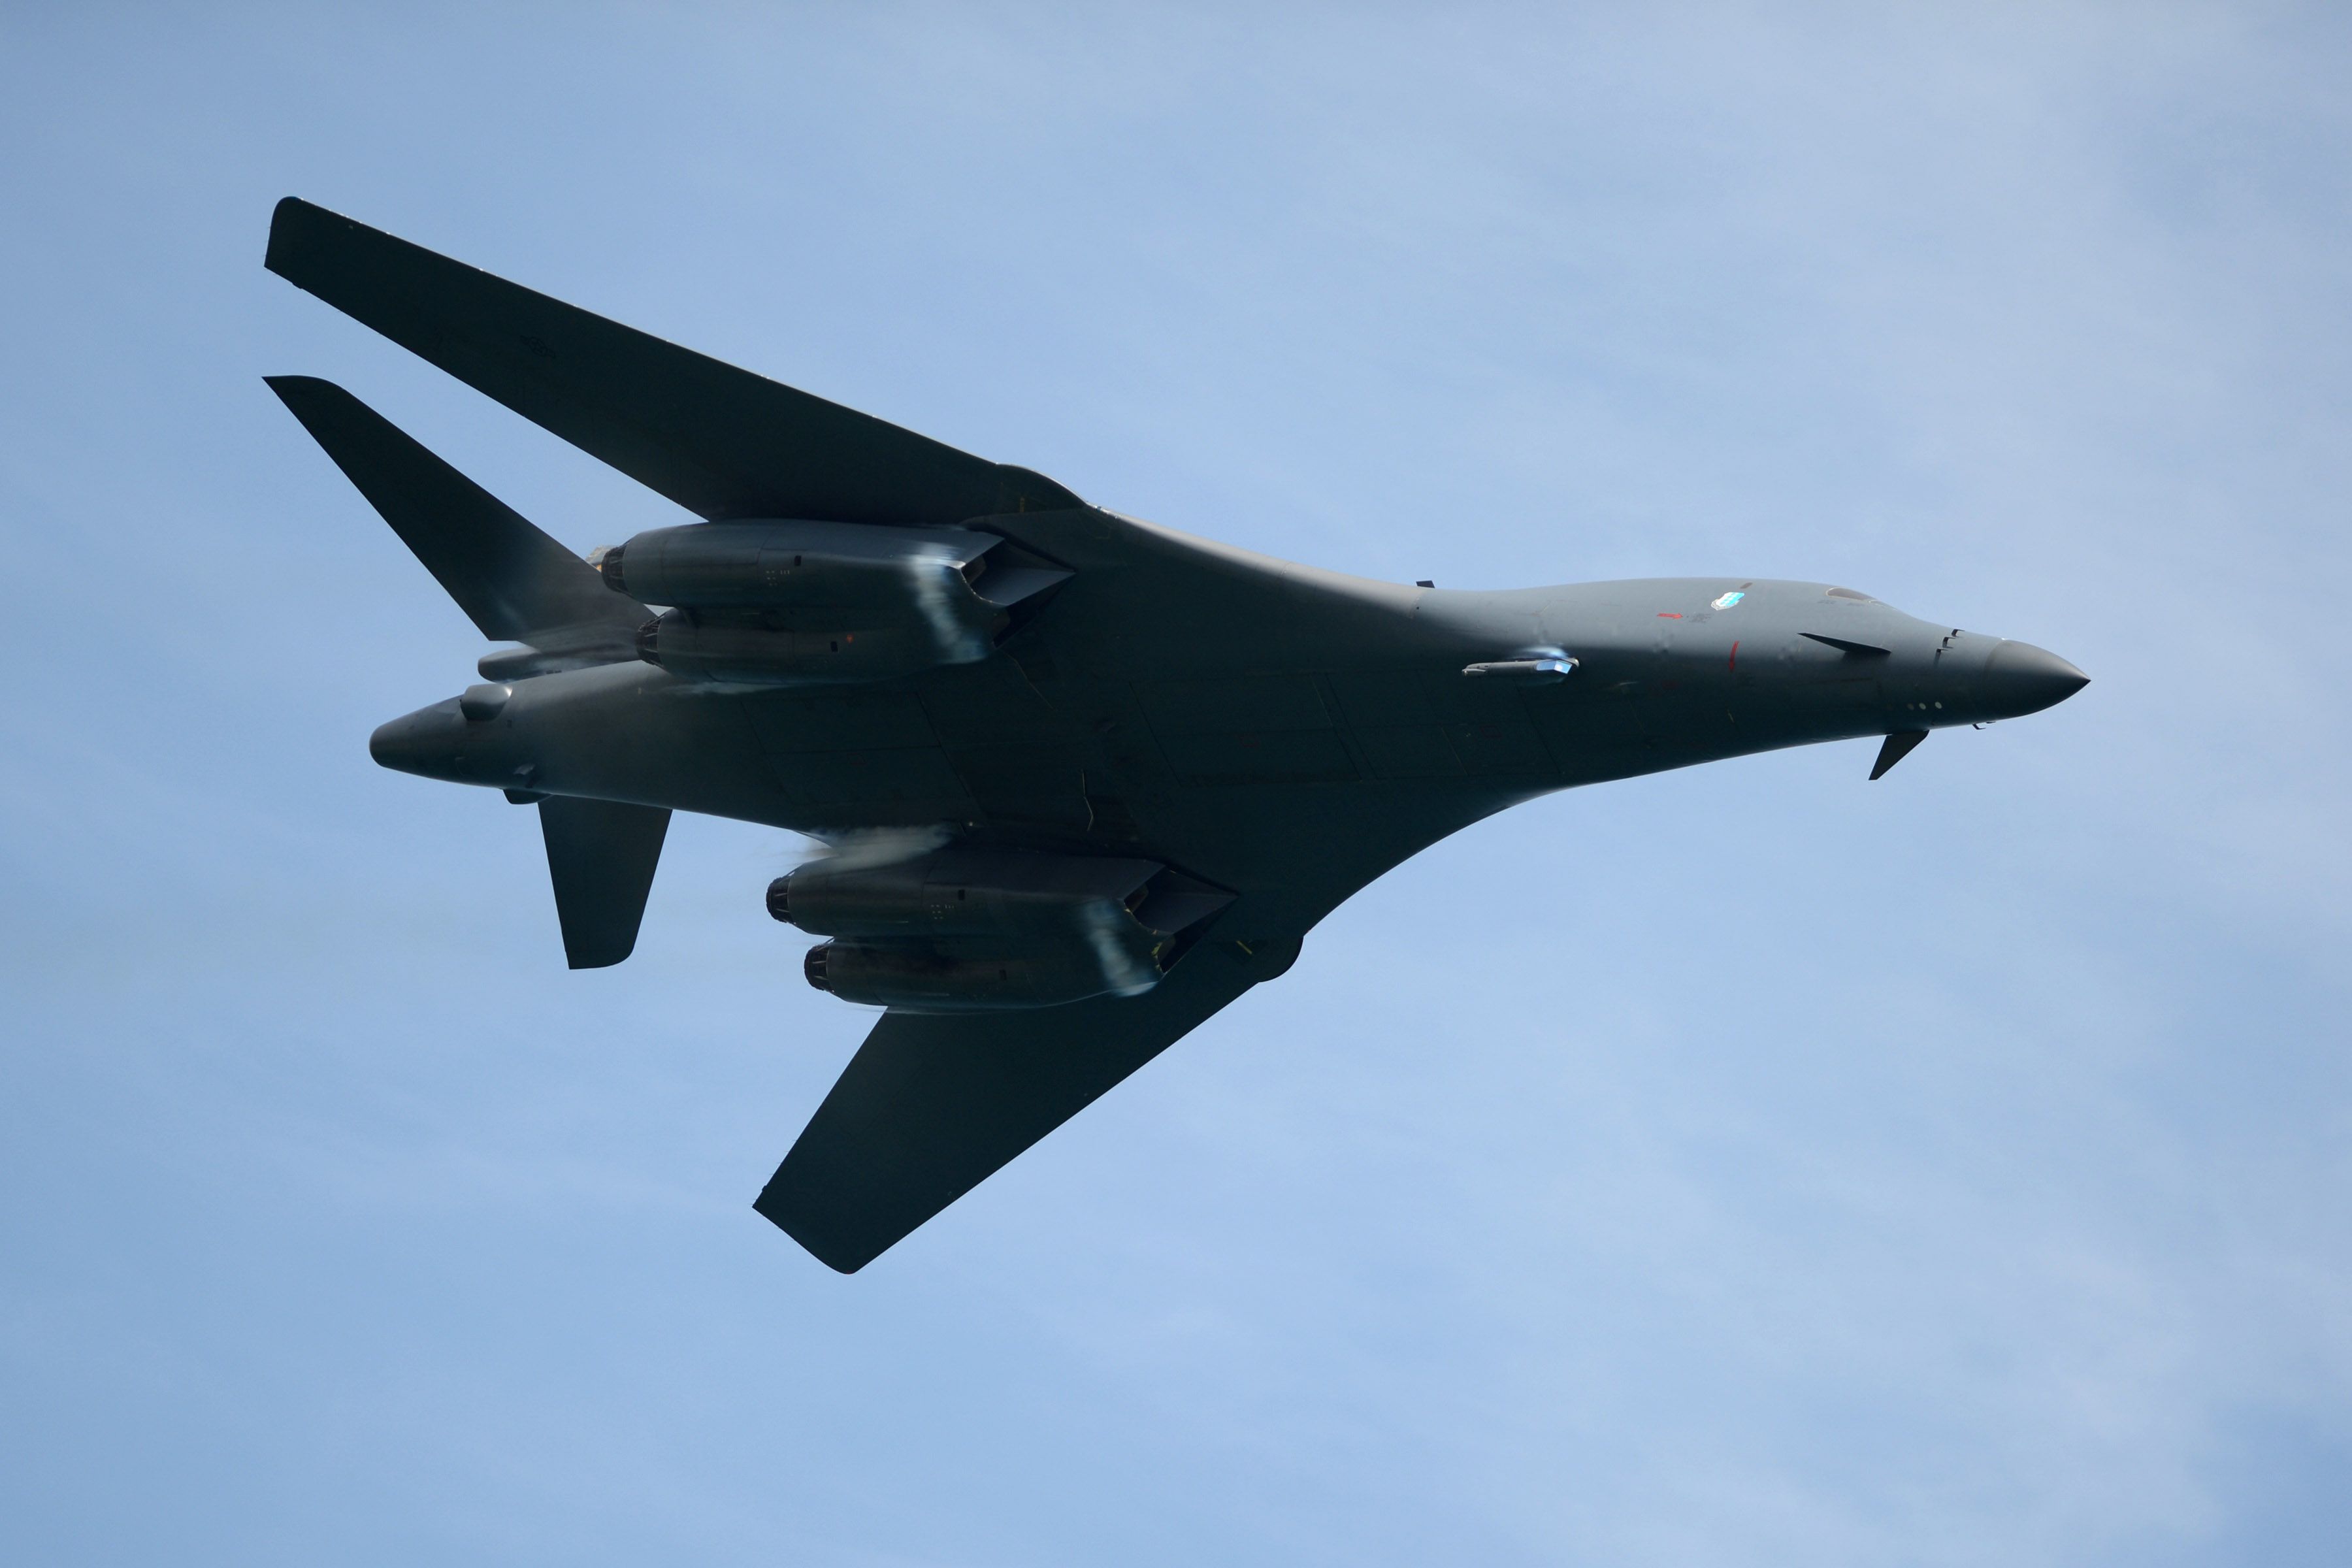 This Deadly Version of the B-1 Bomber Could Kill Aircraft Carriers